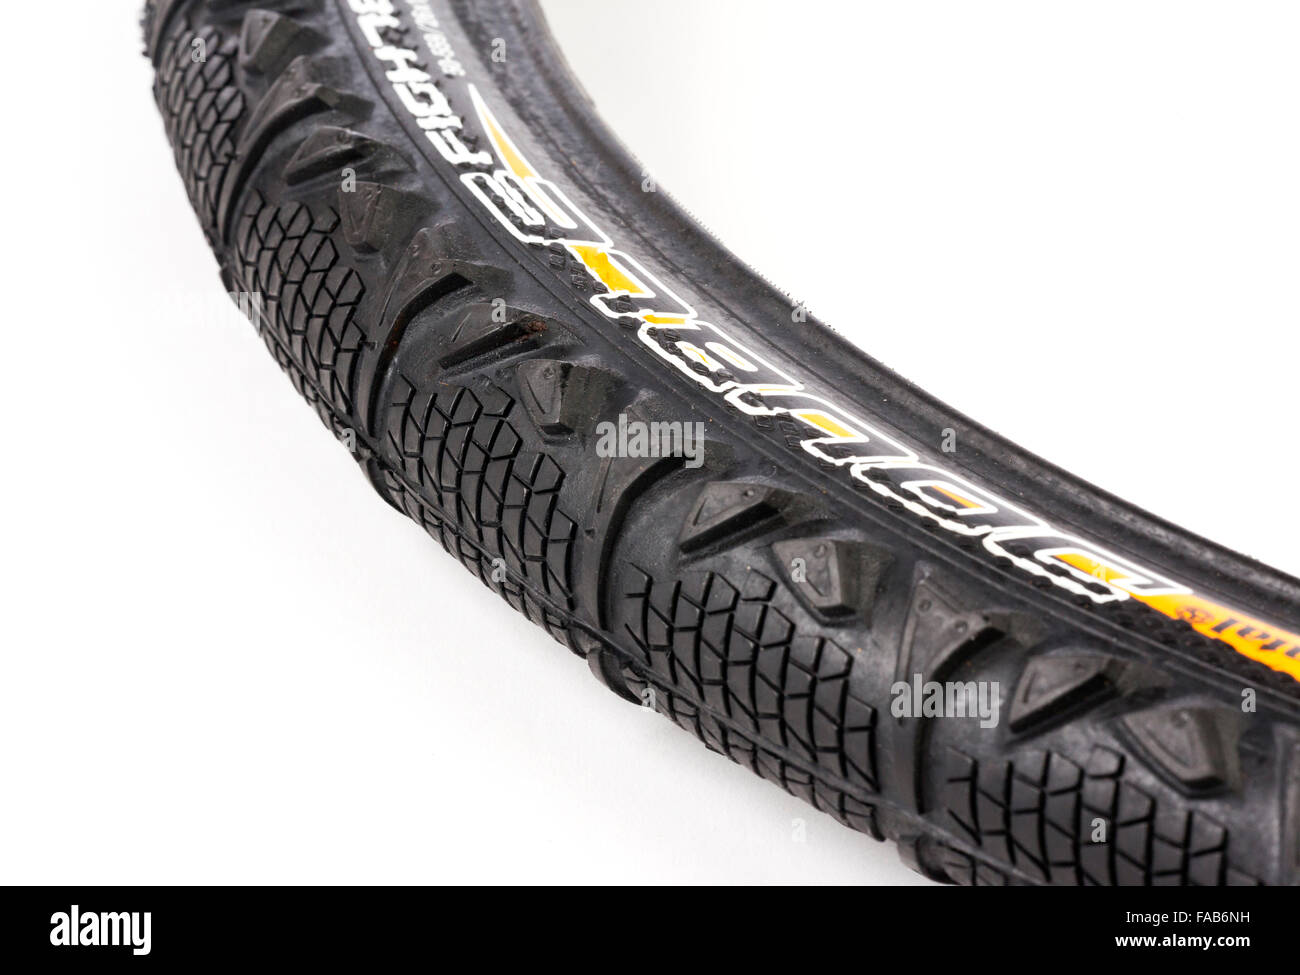 rubber bicycle tire / tyre Stock Photo